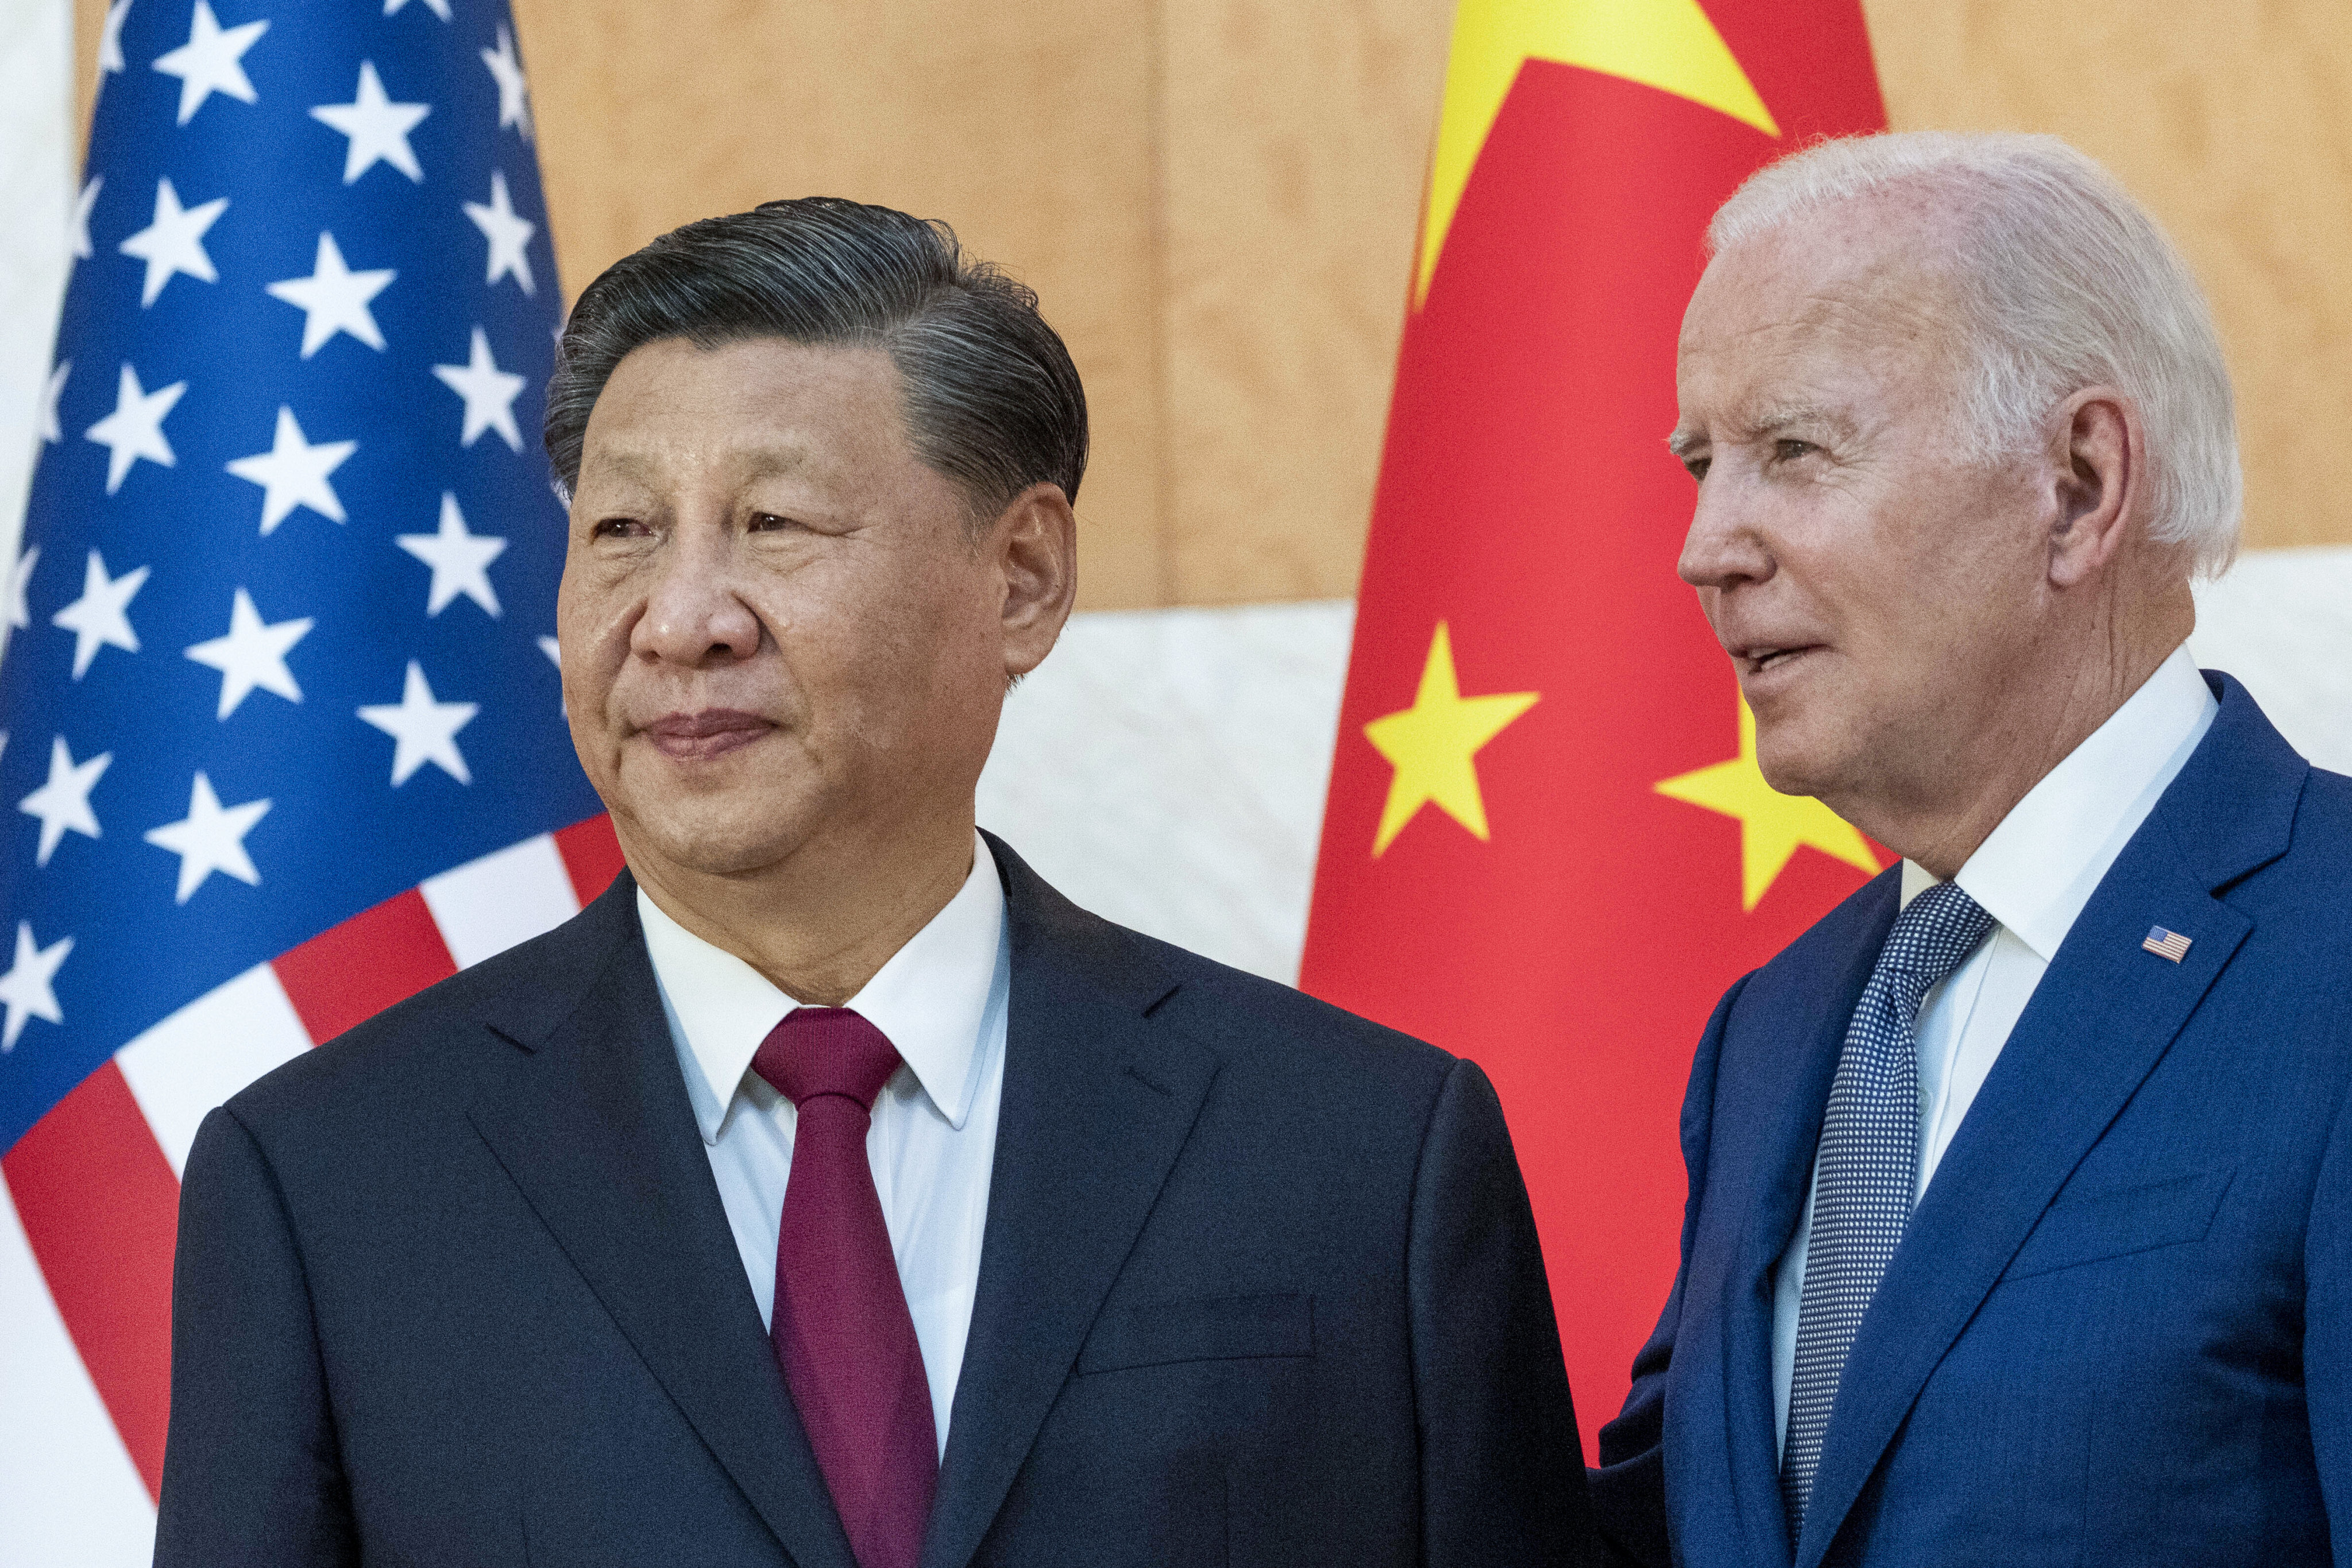 Chinese President Xi Jinping’s meeting with US counterpart Joe Biden will not be derailed by fresh pressure to sanction Hong Kong officals and legal figures, experts say. Photo: AP